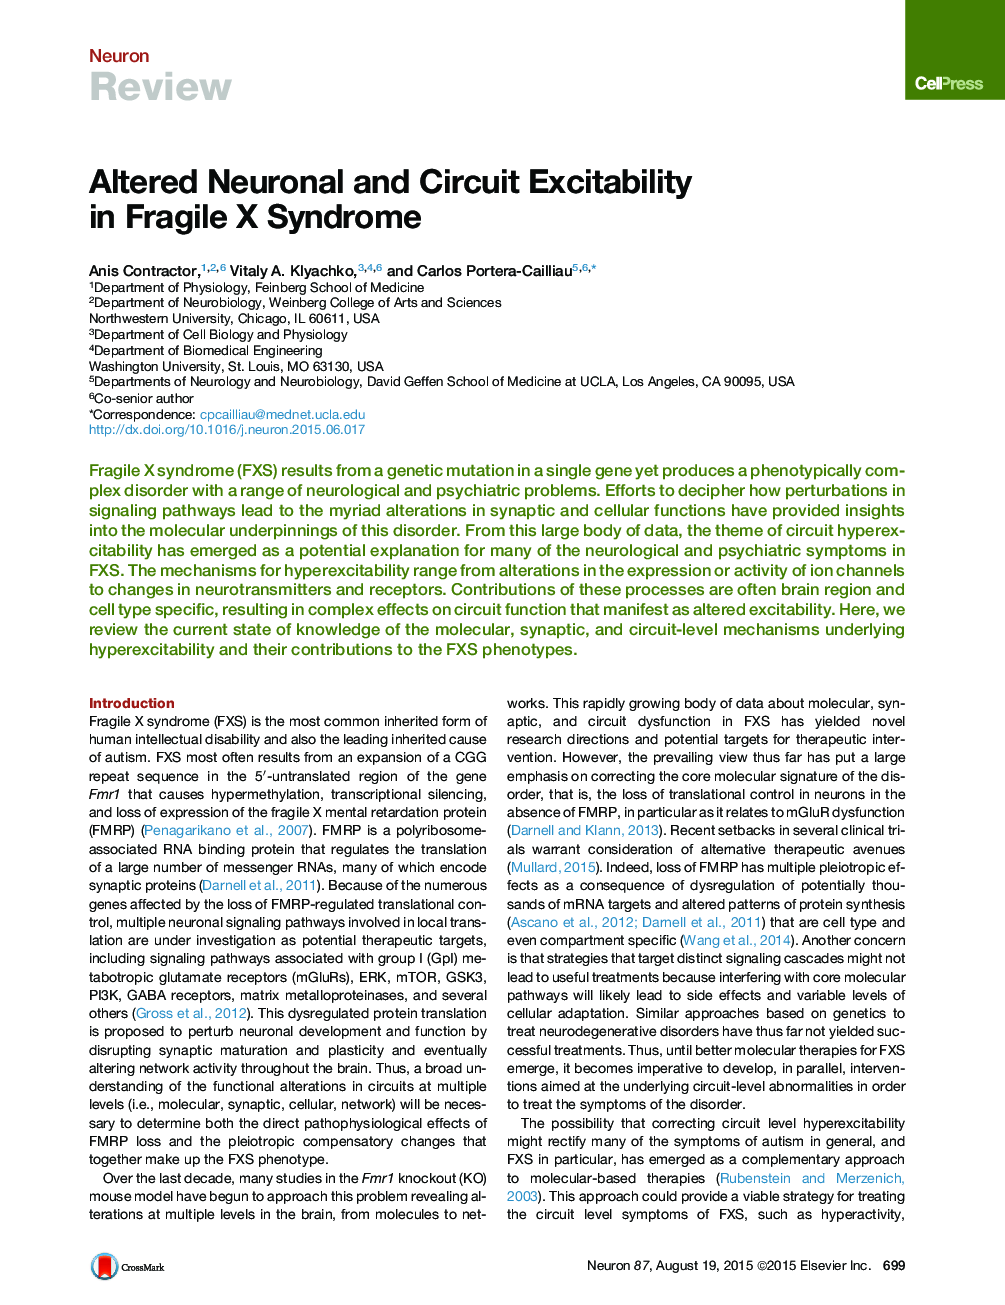 Altered Neuronal and Circuit Excitability in Fragile X Syndrome